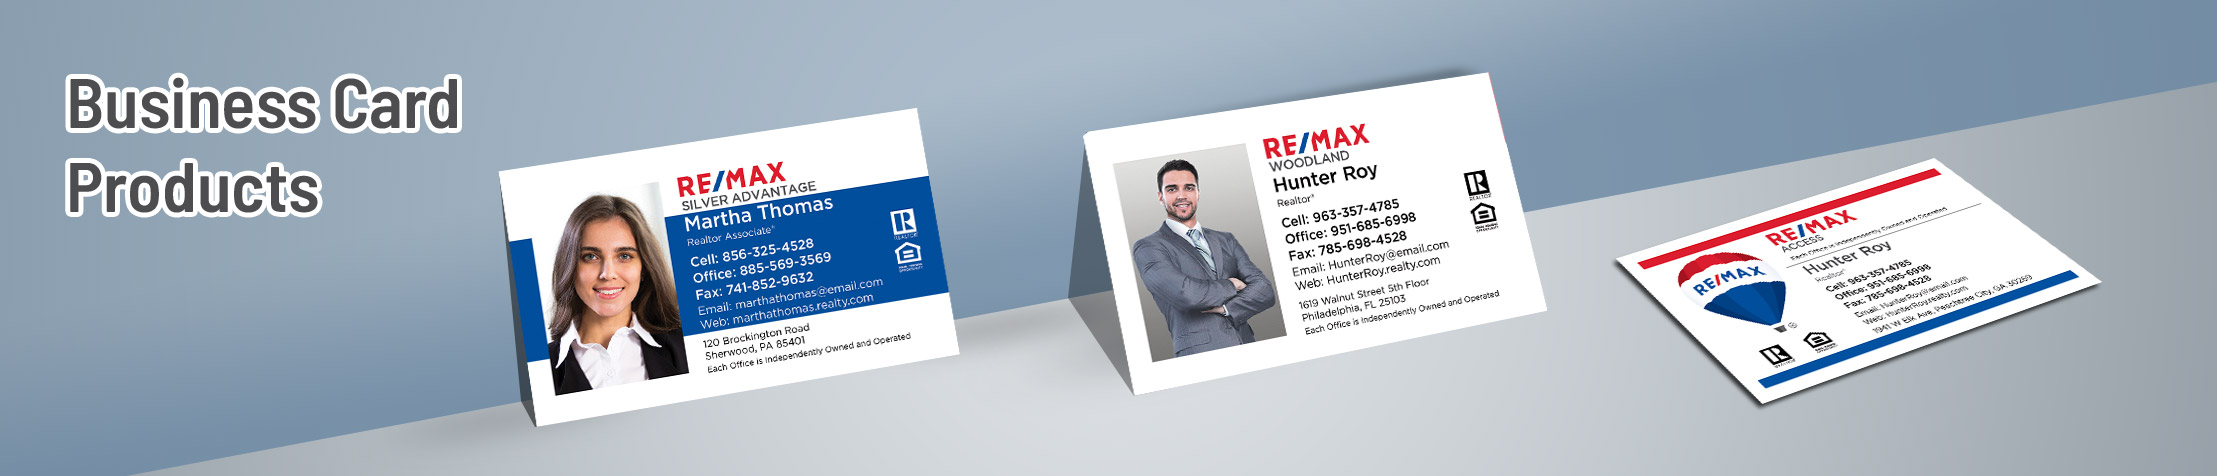 RE/MAX Real Estate Business Card Products - RE/MAX  - Unique, Custom Business Cards Printed on Quality Stock with Creative Designs for Realtors | Sparkprint.com